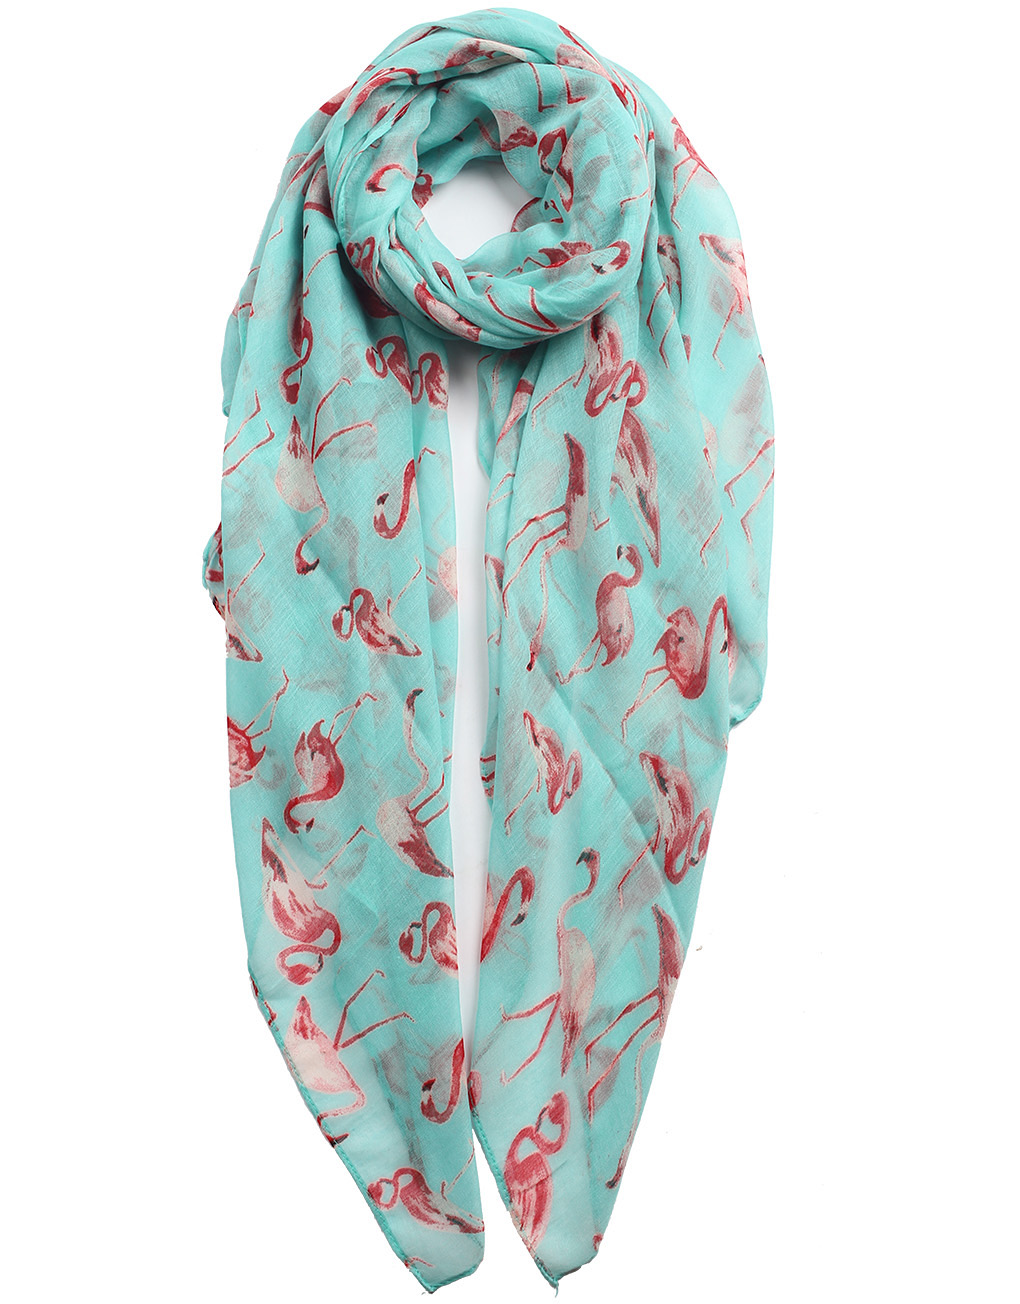 Flamingo Print Maxi Scarf High Quality Cotton Feel Super Soft Winter Scarves Christmas Gifts UK Seller